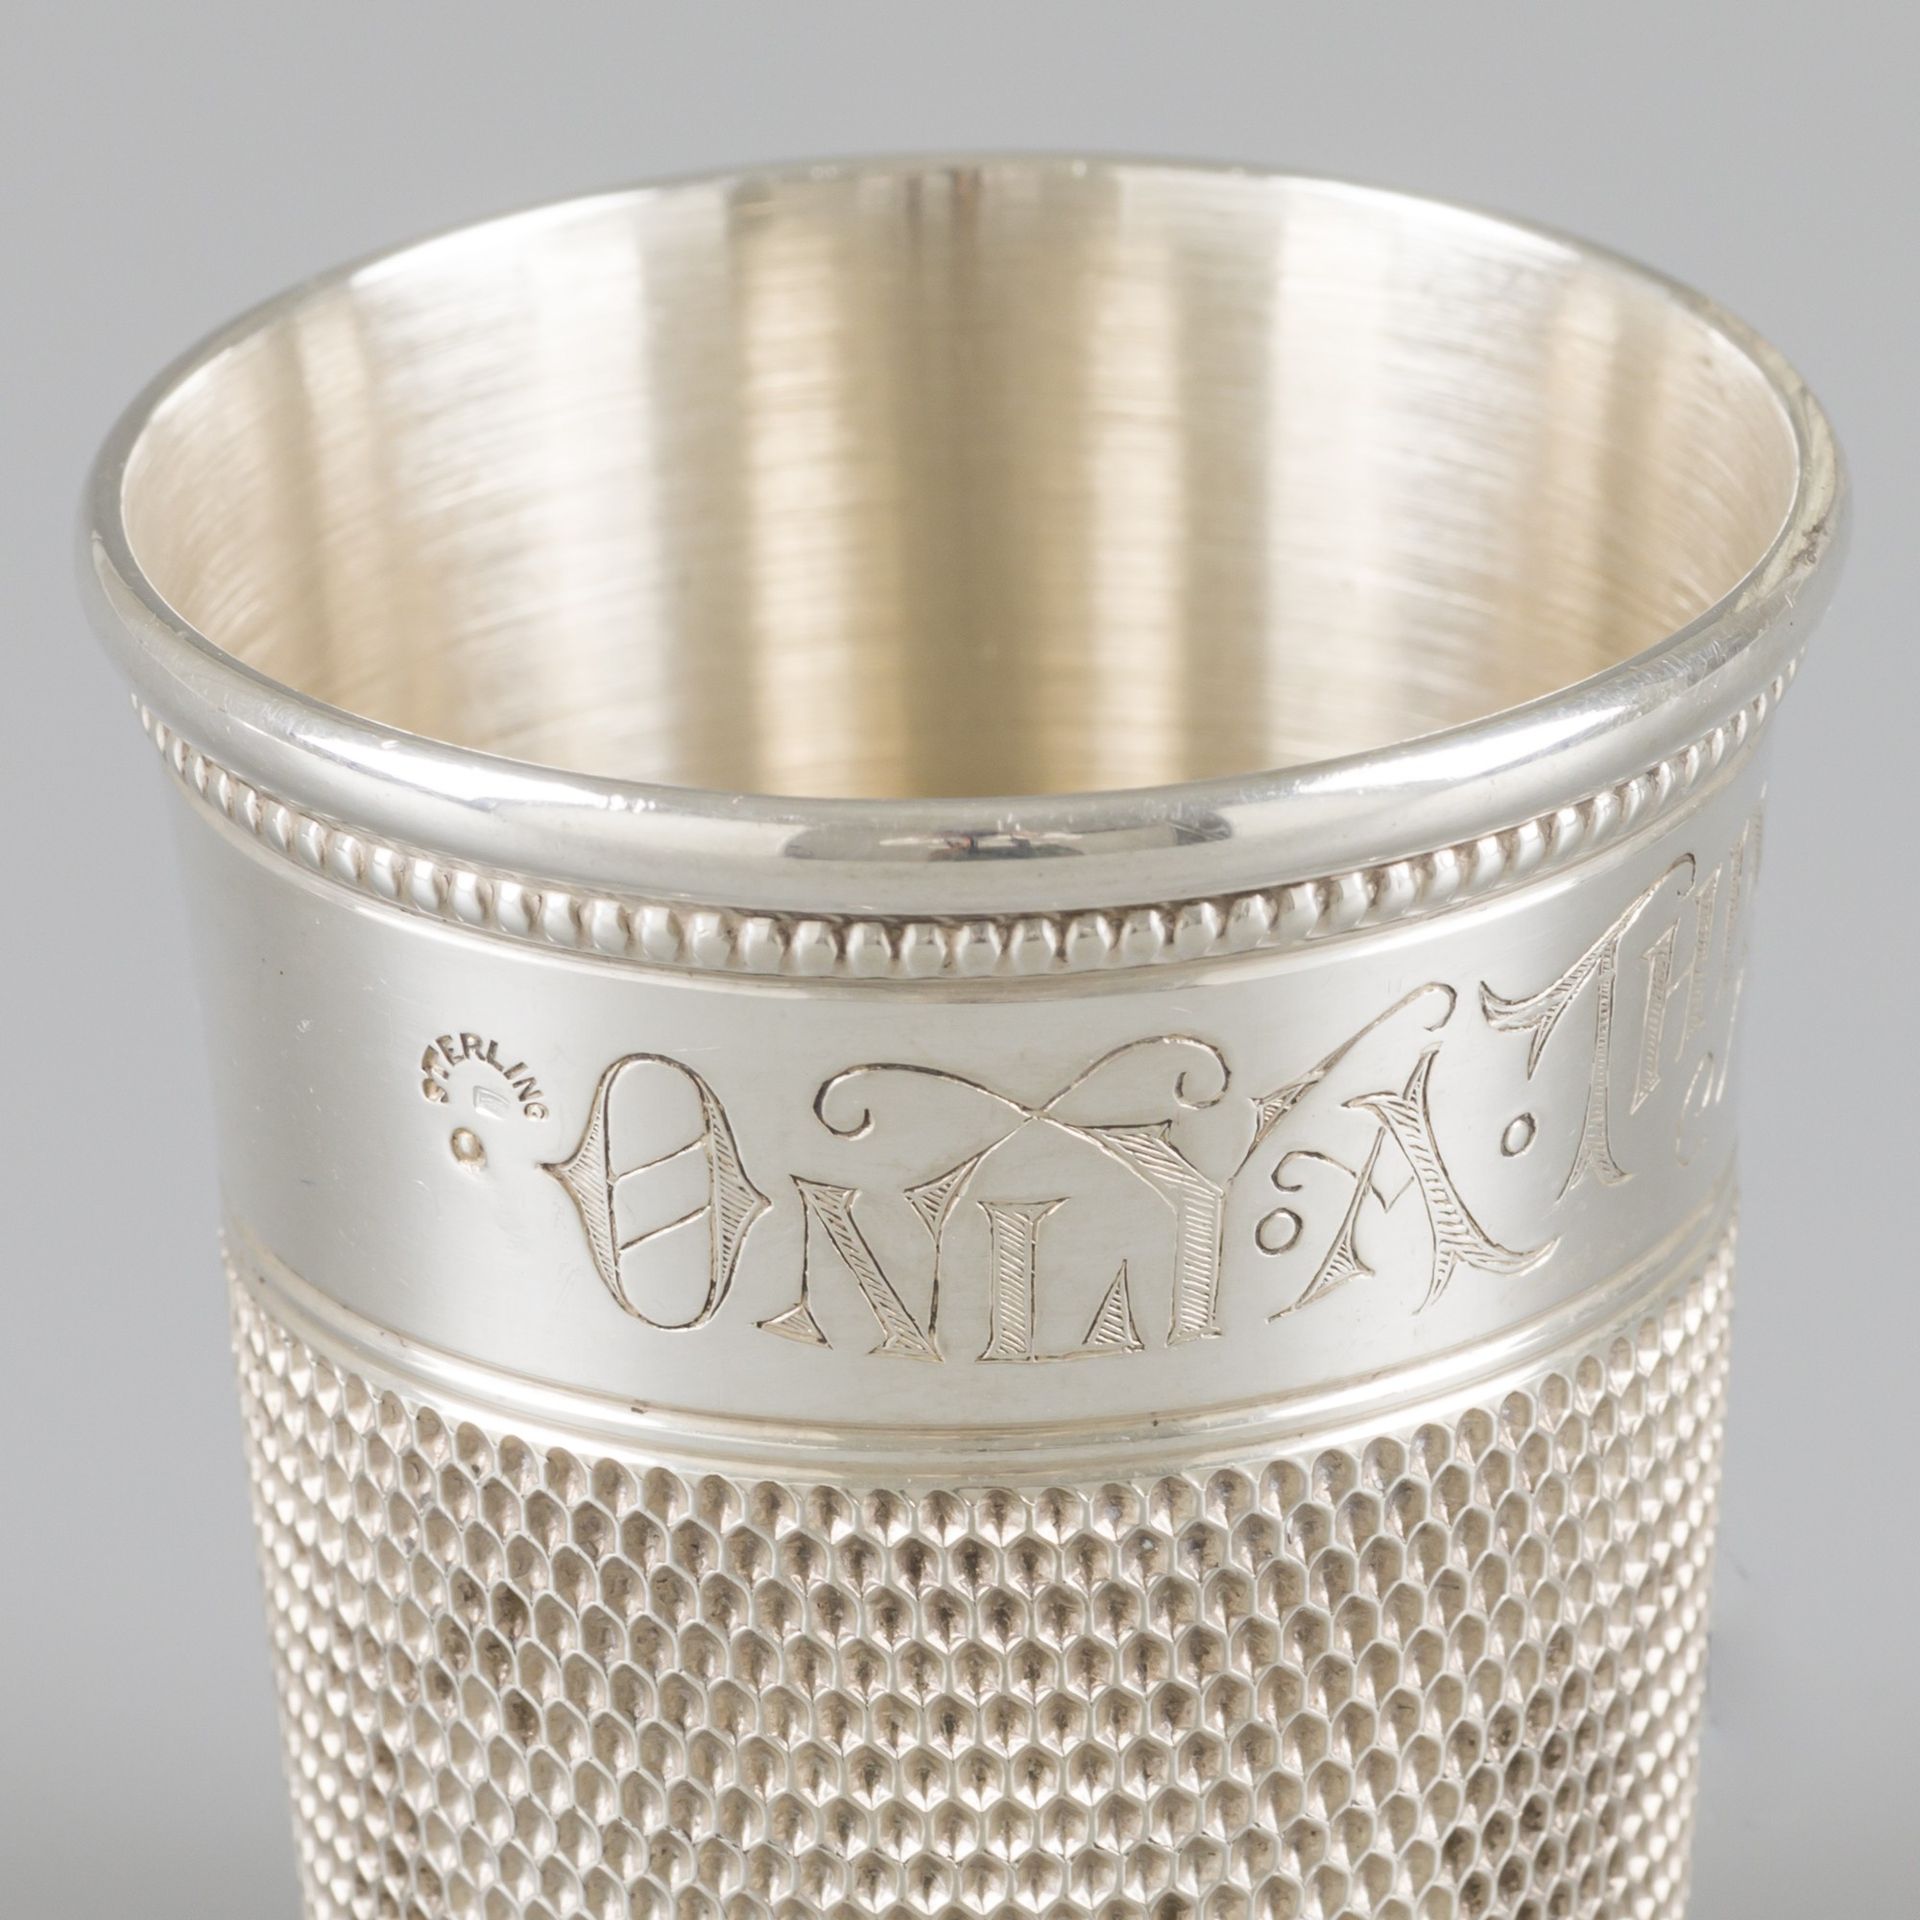 Drink / measuring cup thimble silver. Designed as a thimble, with engraved text:&hellip;